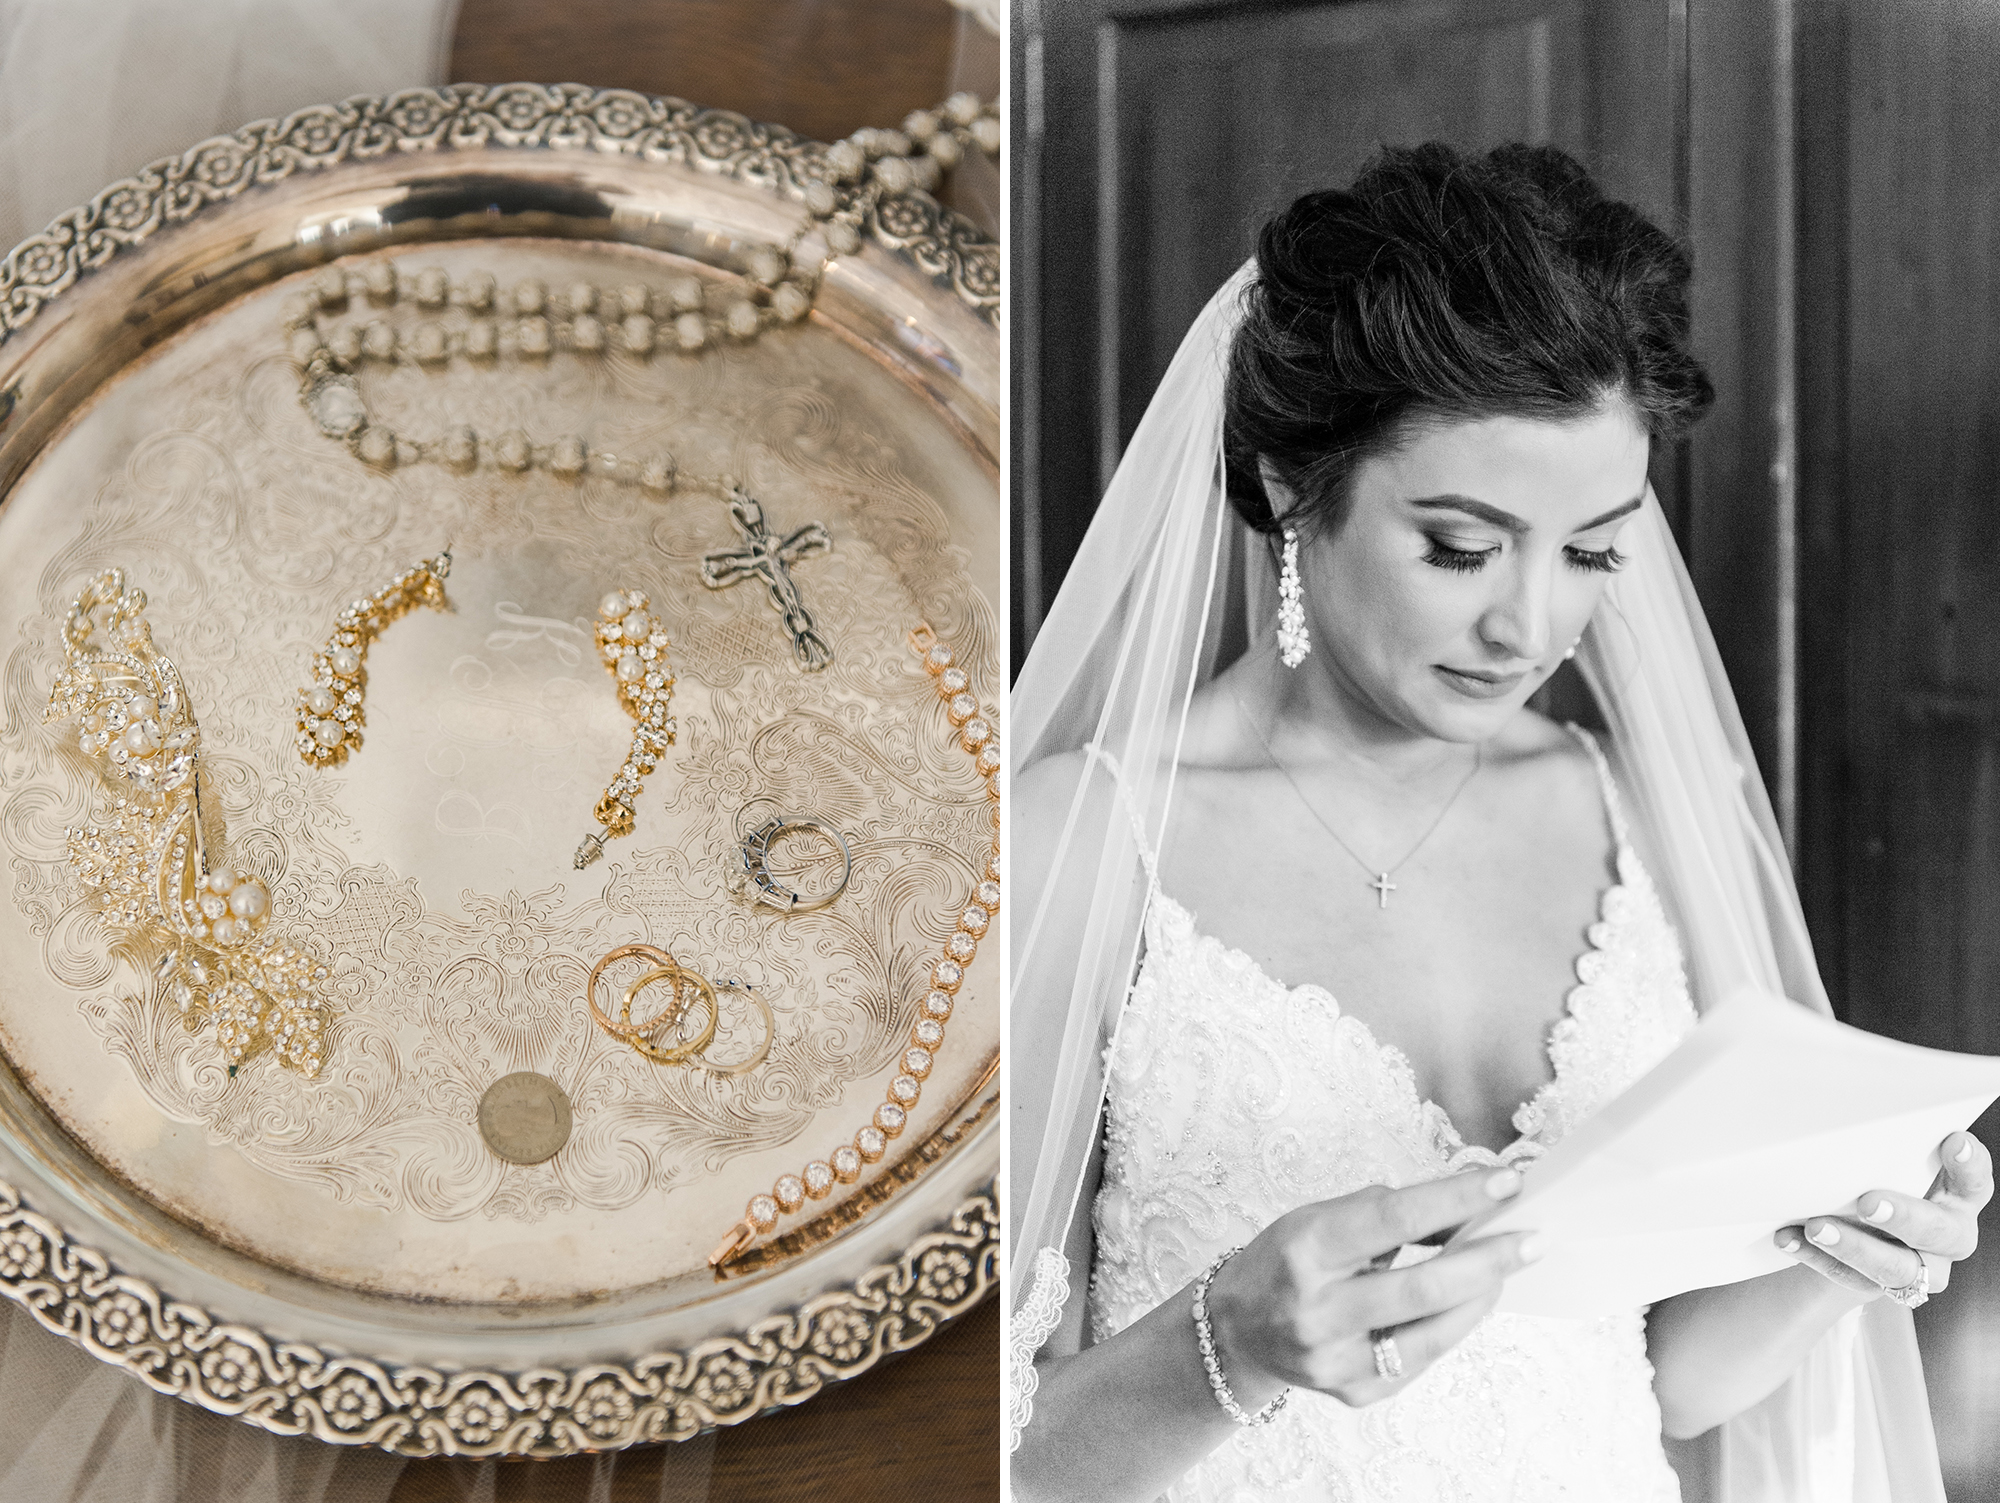 Bride's jewelry on silver plate with rosary; bride reading note from groom